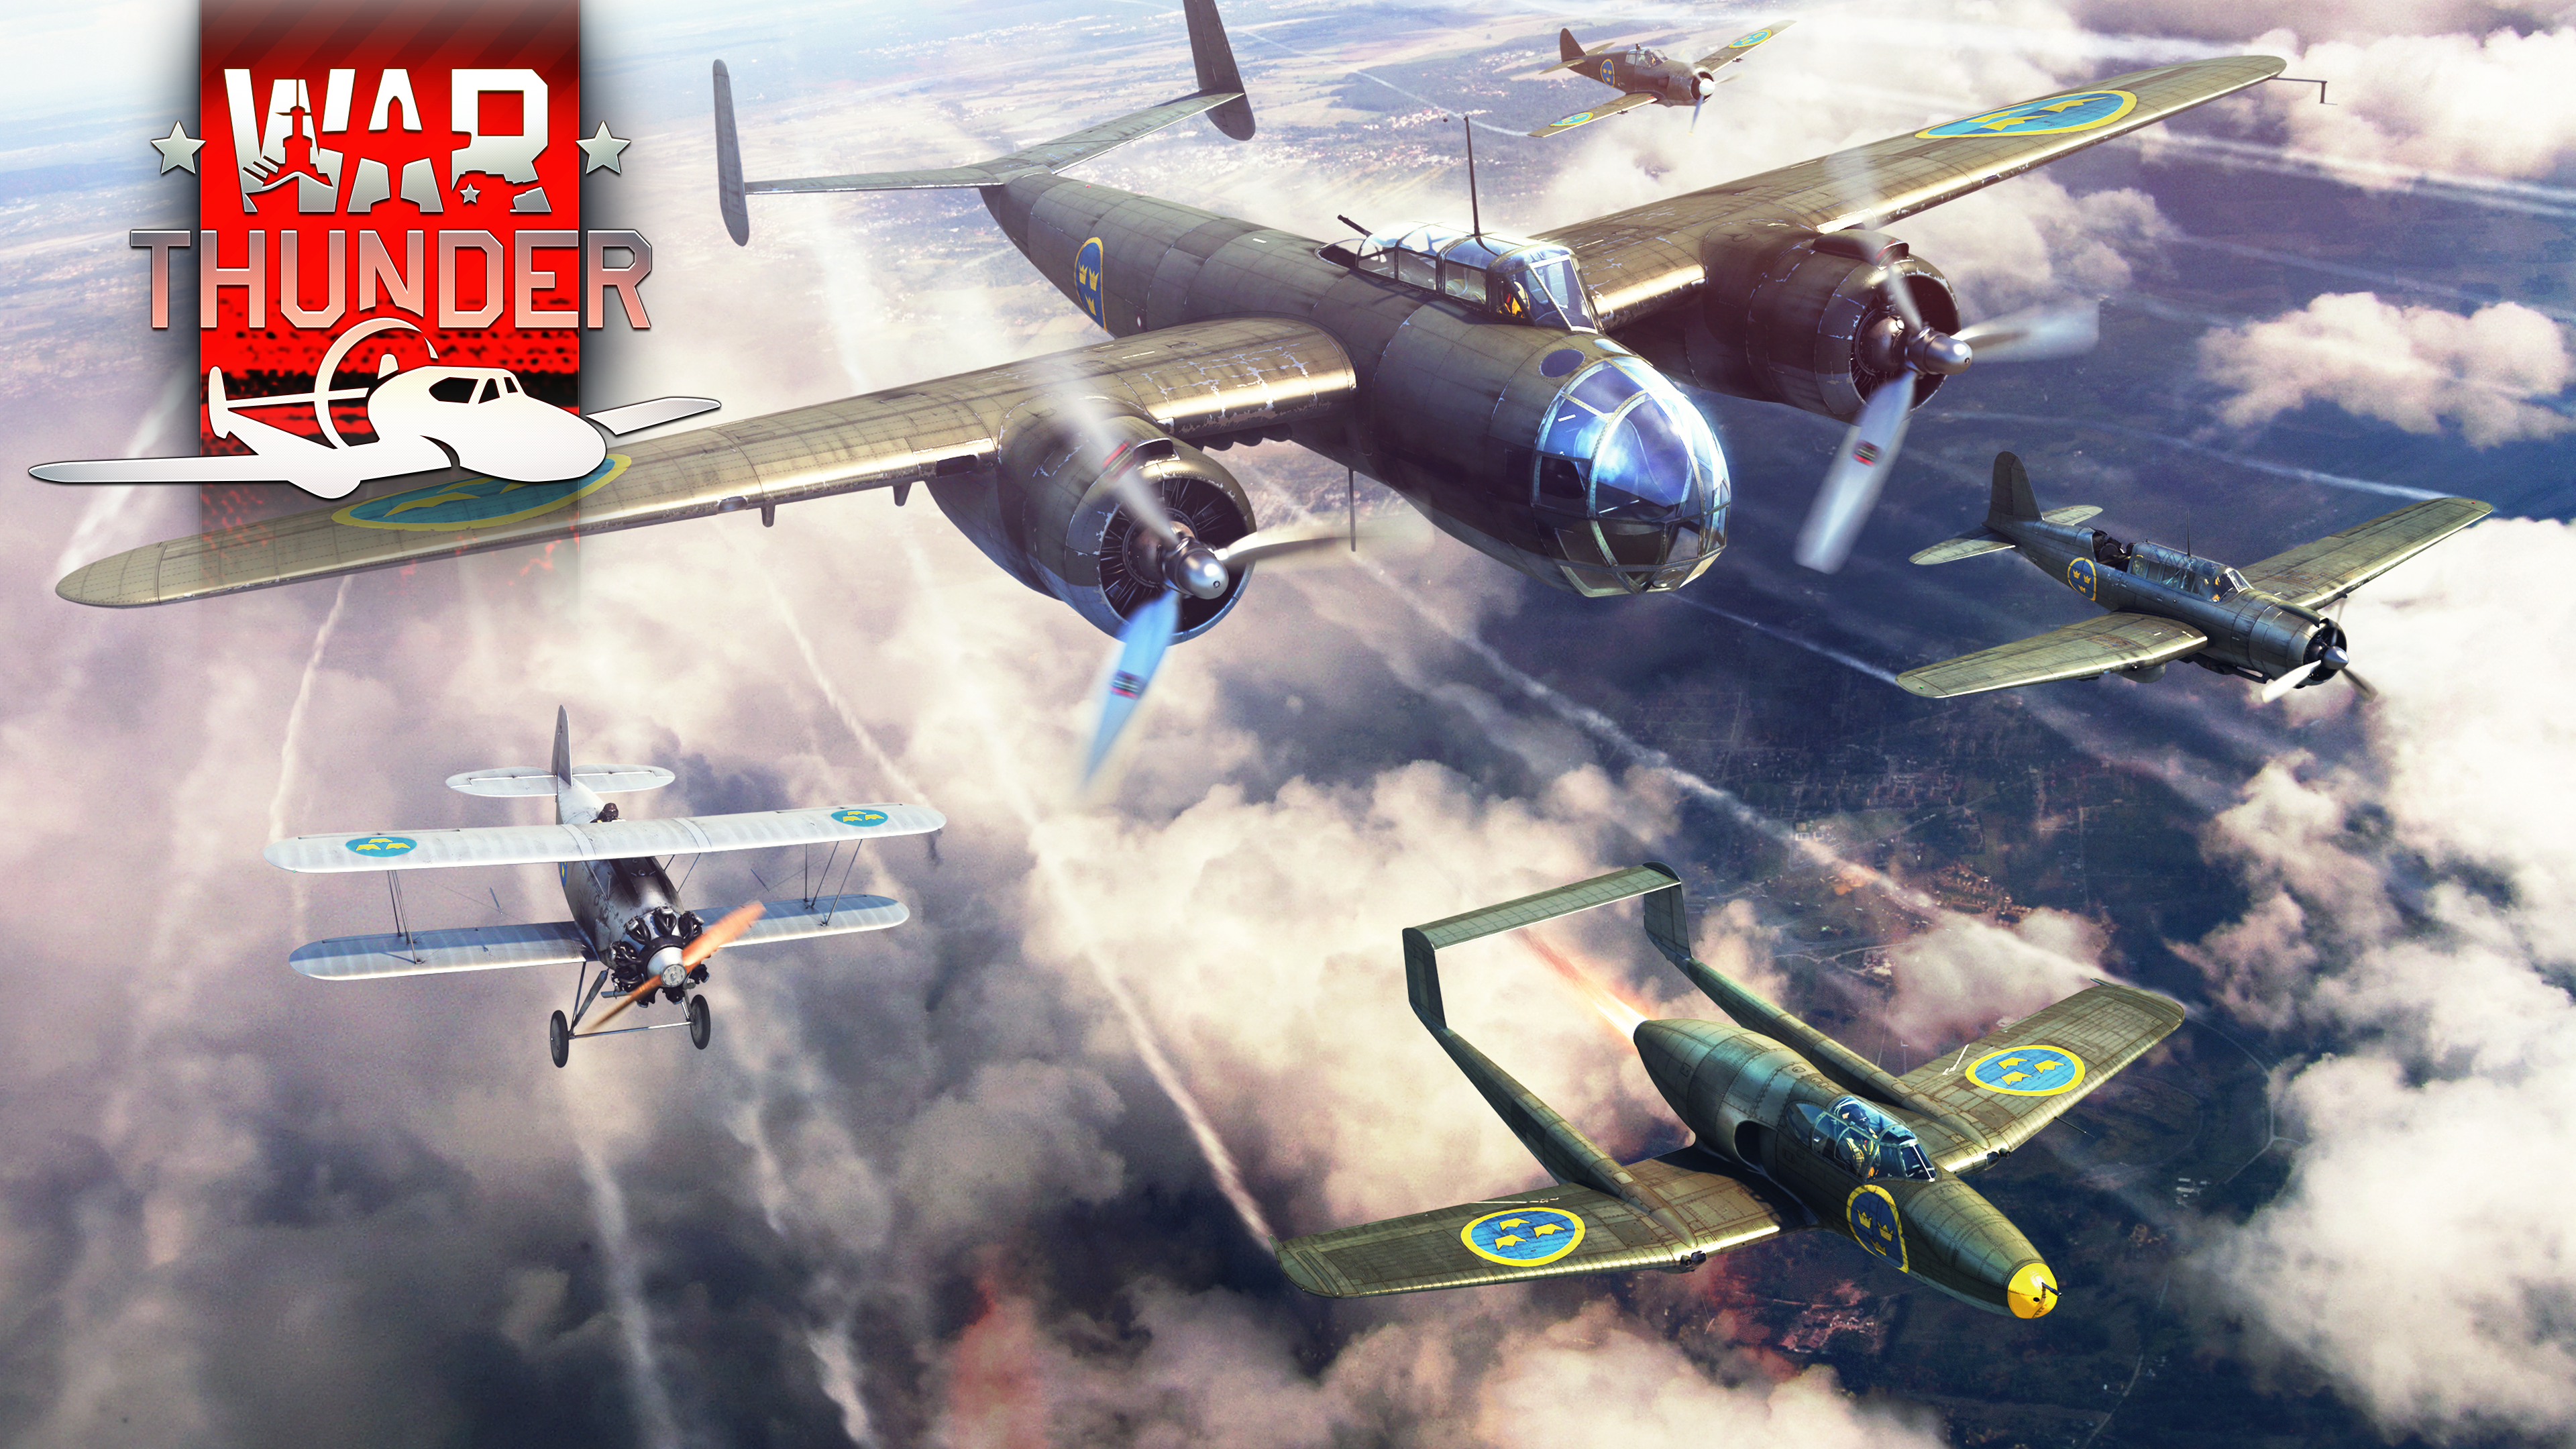 War Thunder Offers the Coolest Aircraft, Tanks, Ships and More!